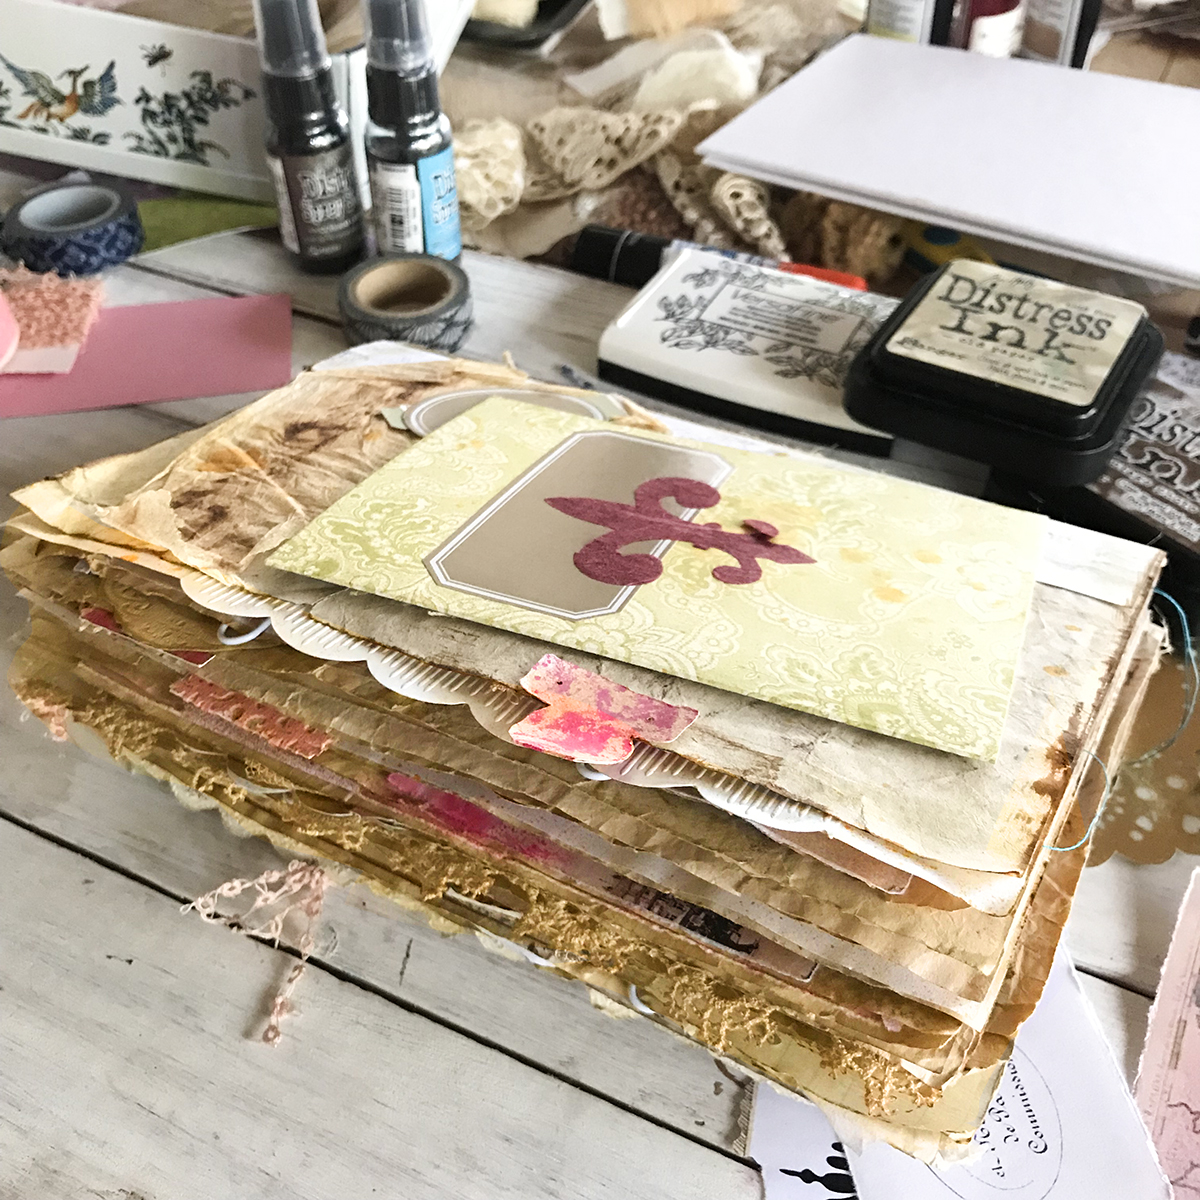 A table with papers and art supplies all over it and junk journal